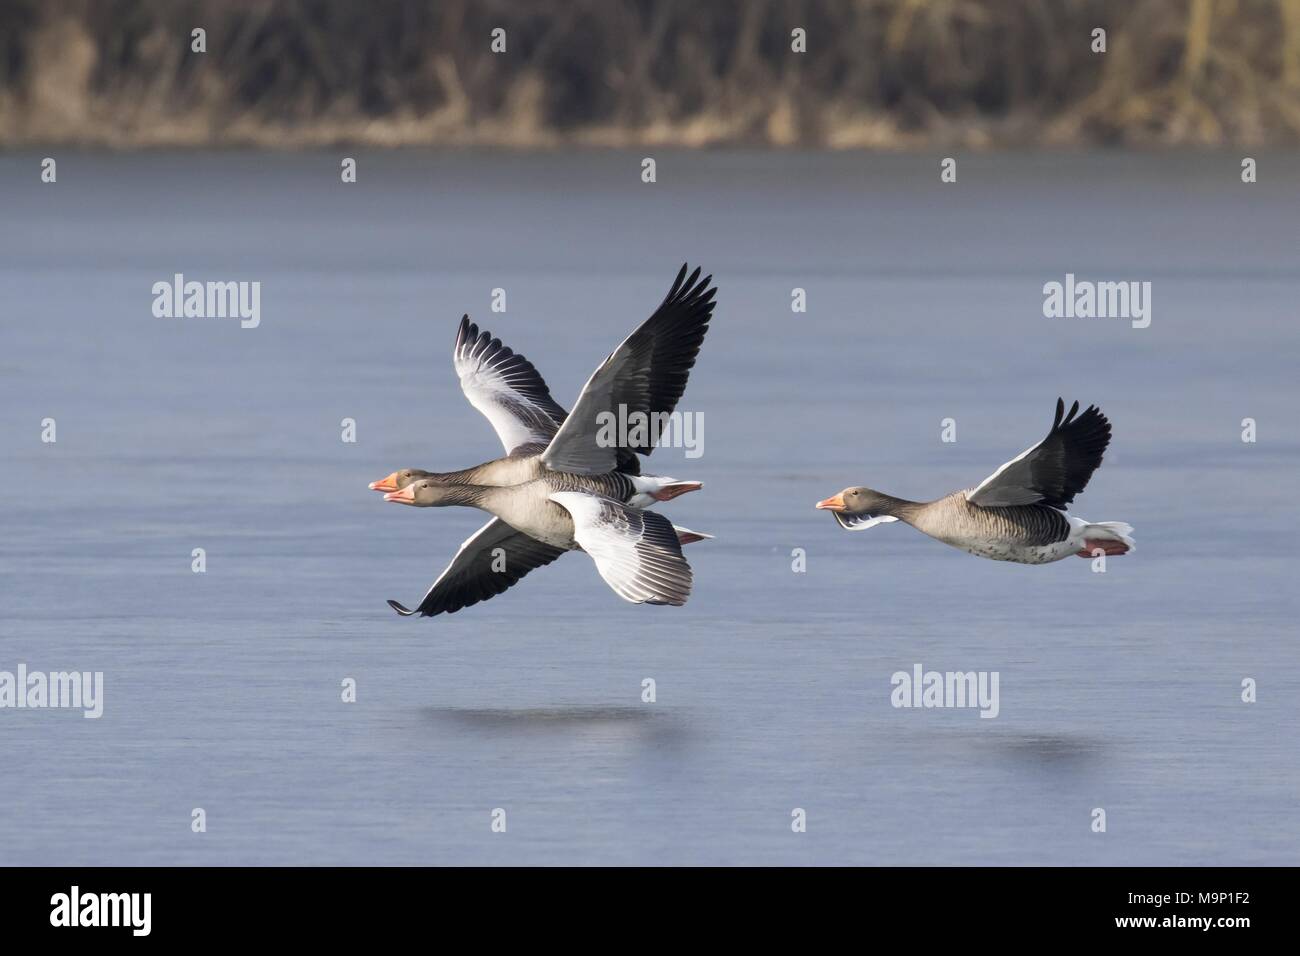 Three Greylag geese (Anser anser), flying over water, Hesse, Germany Stock Photo